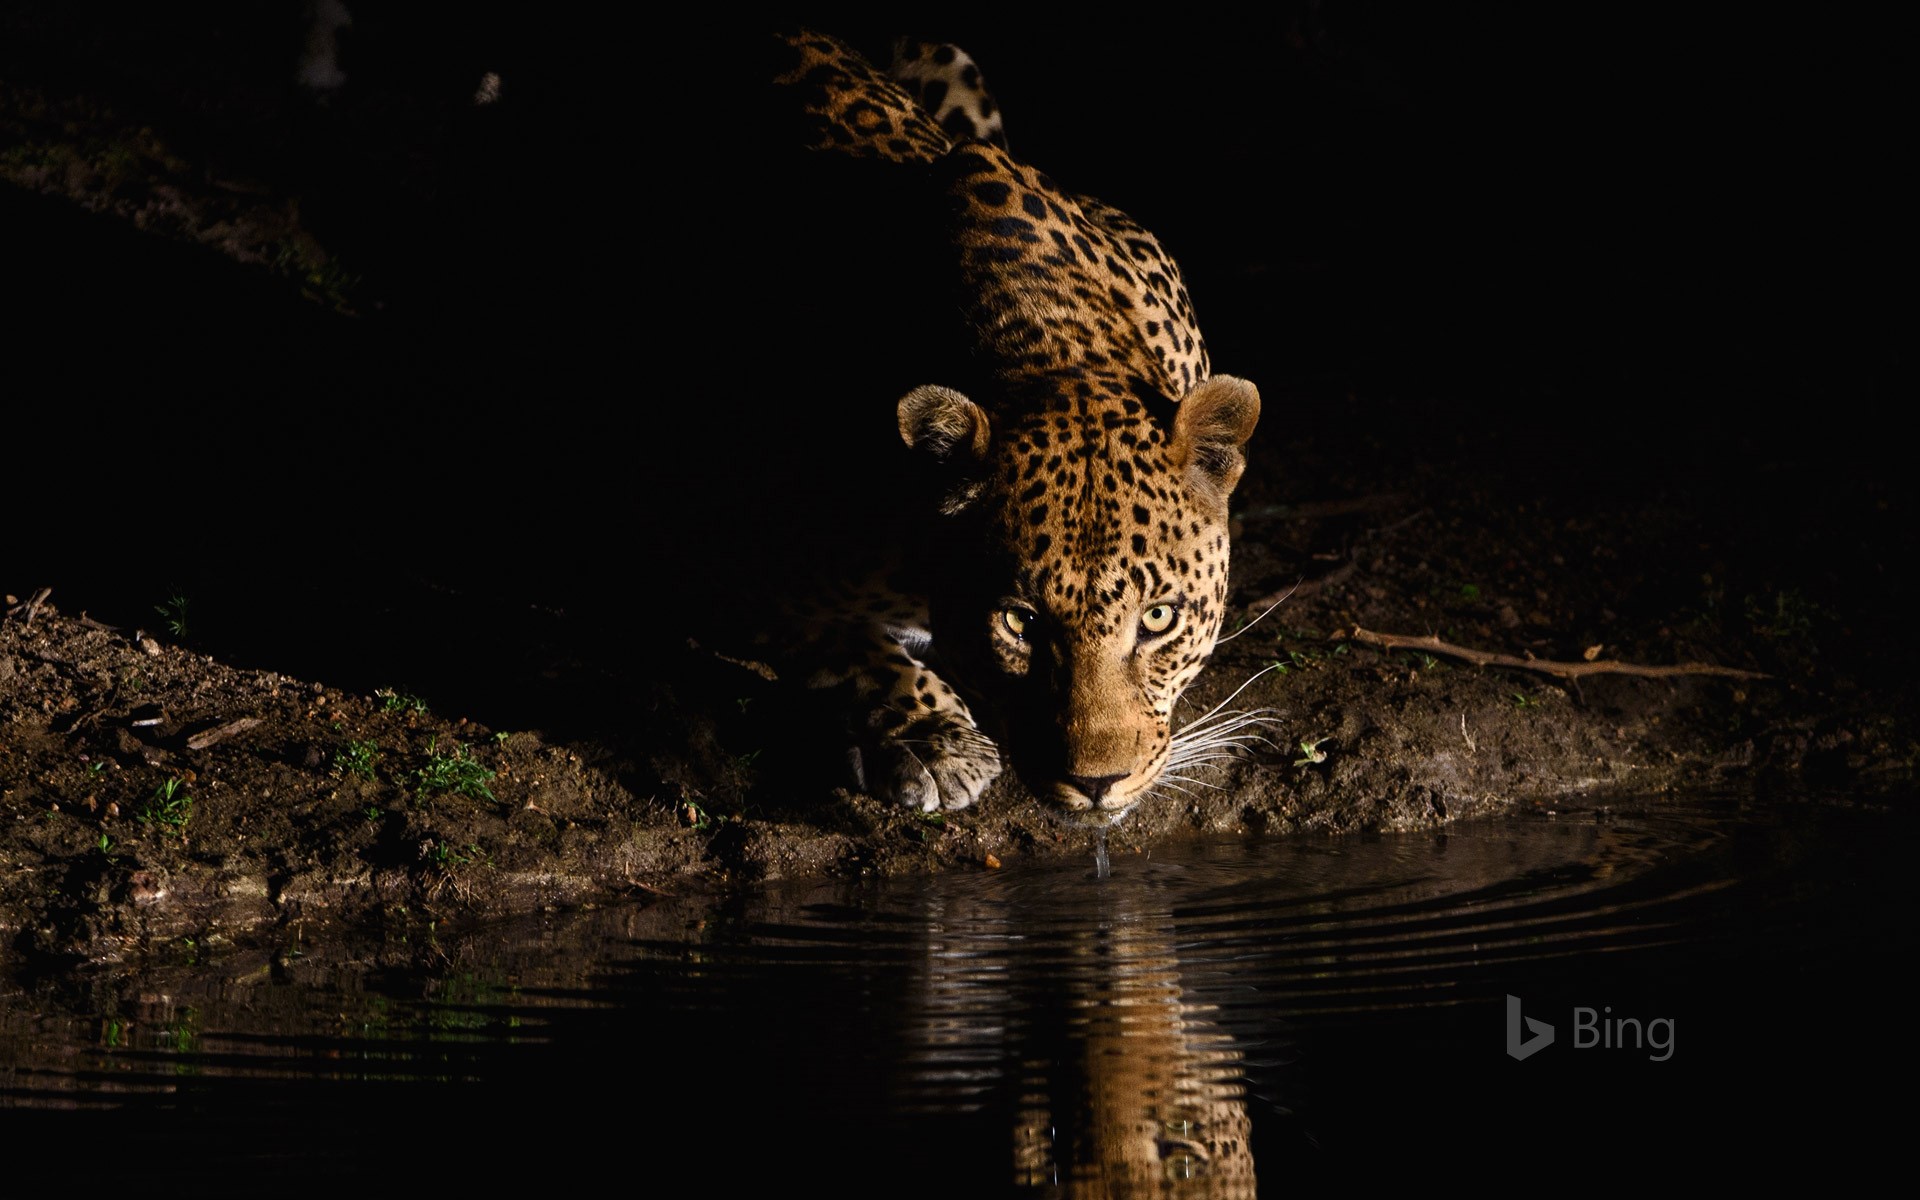 An African leopard in the Londolozi Private Game Reserve, South Africa